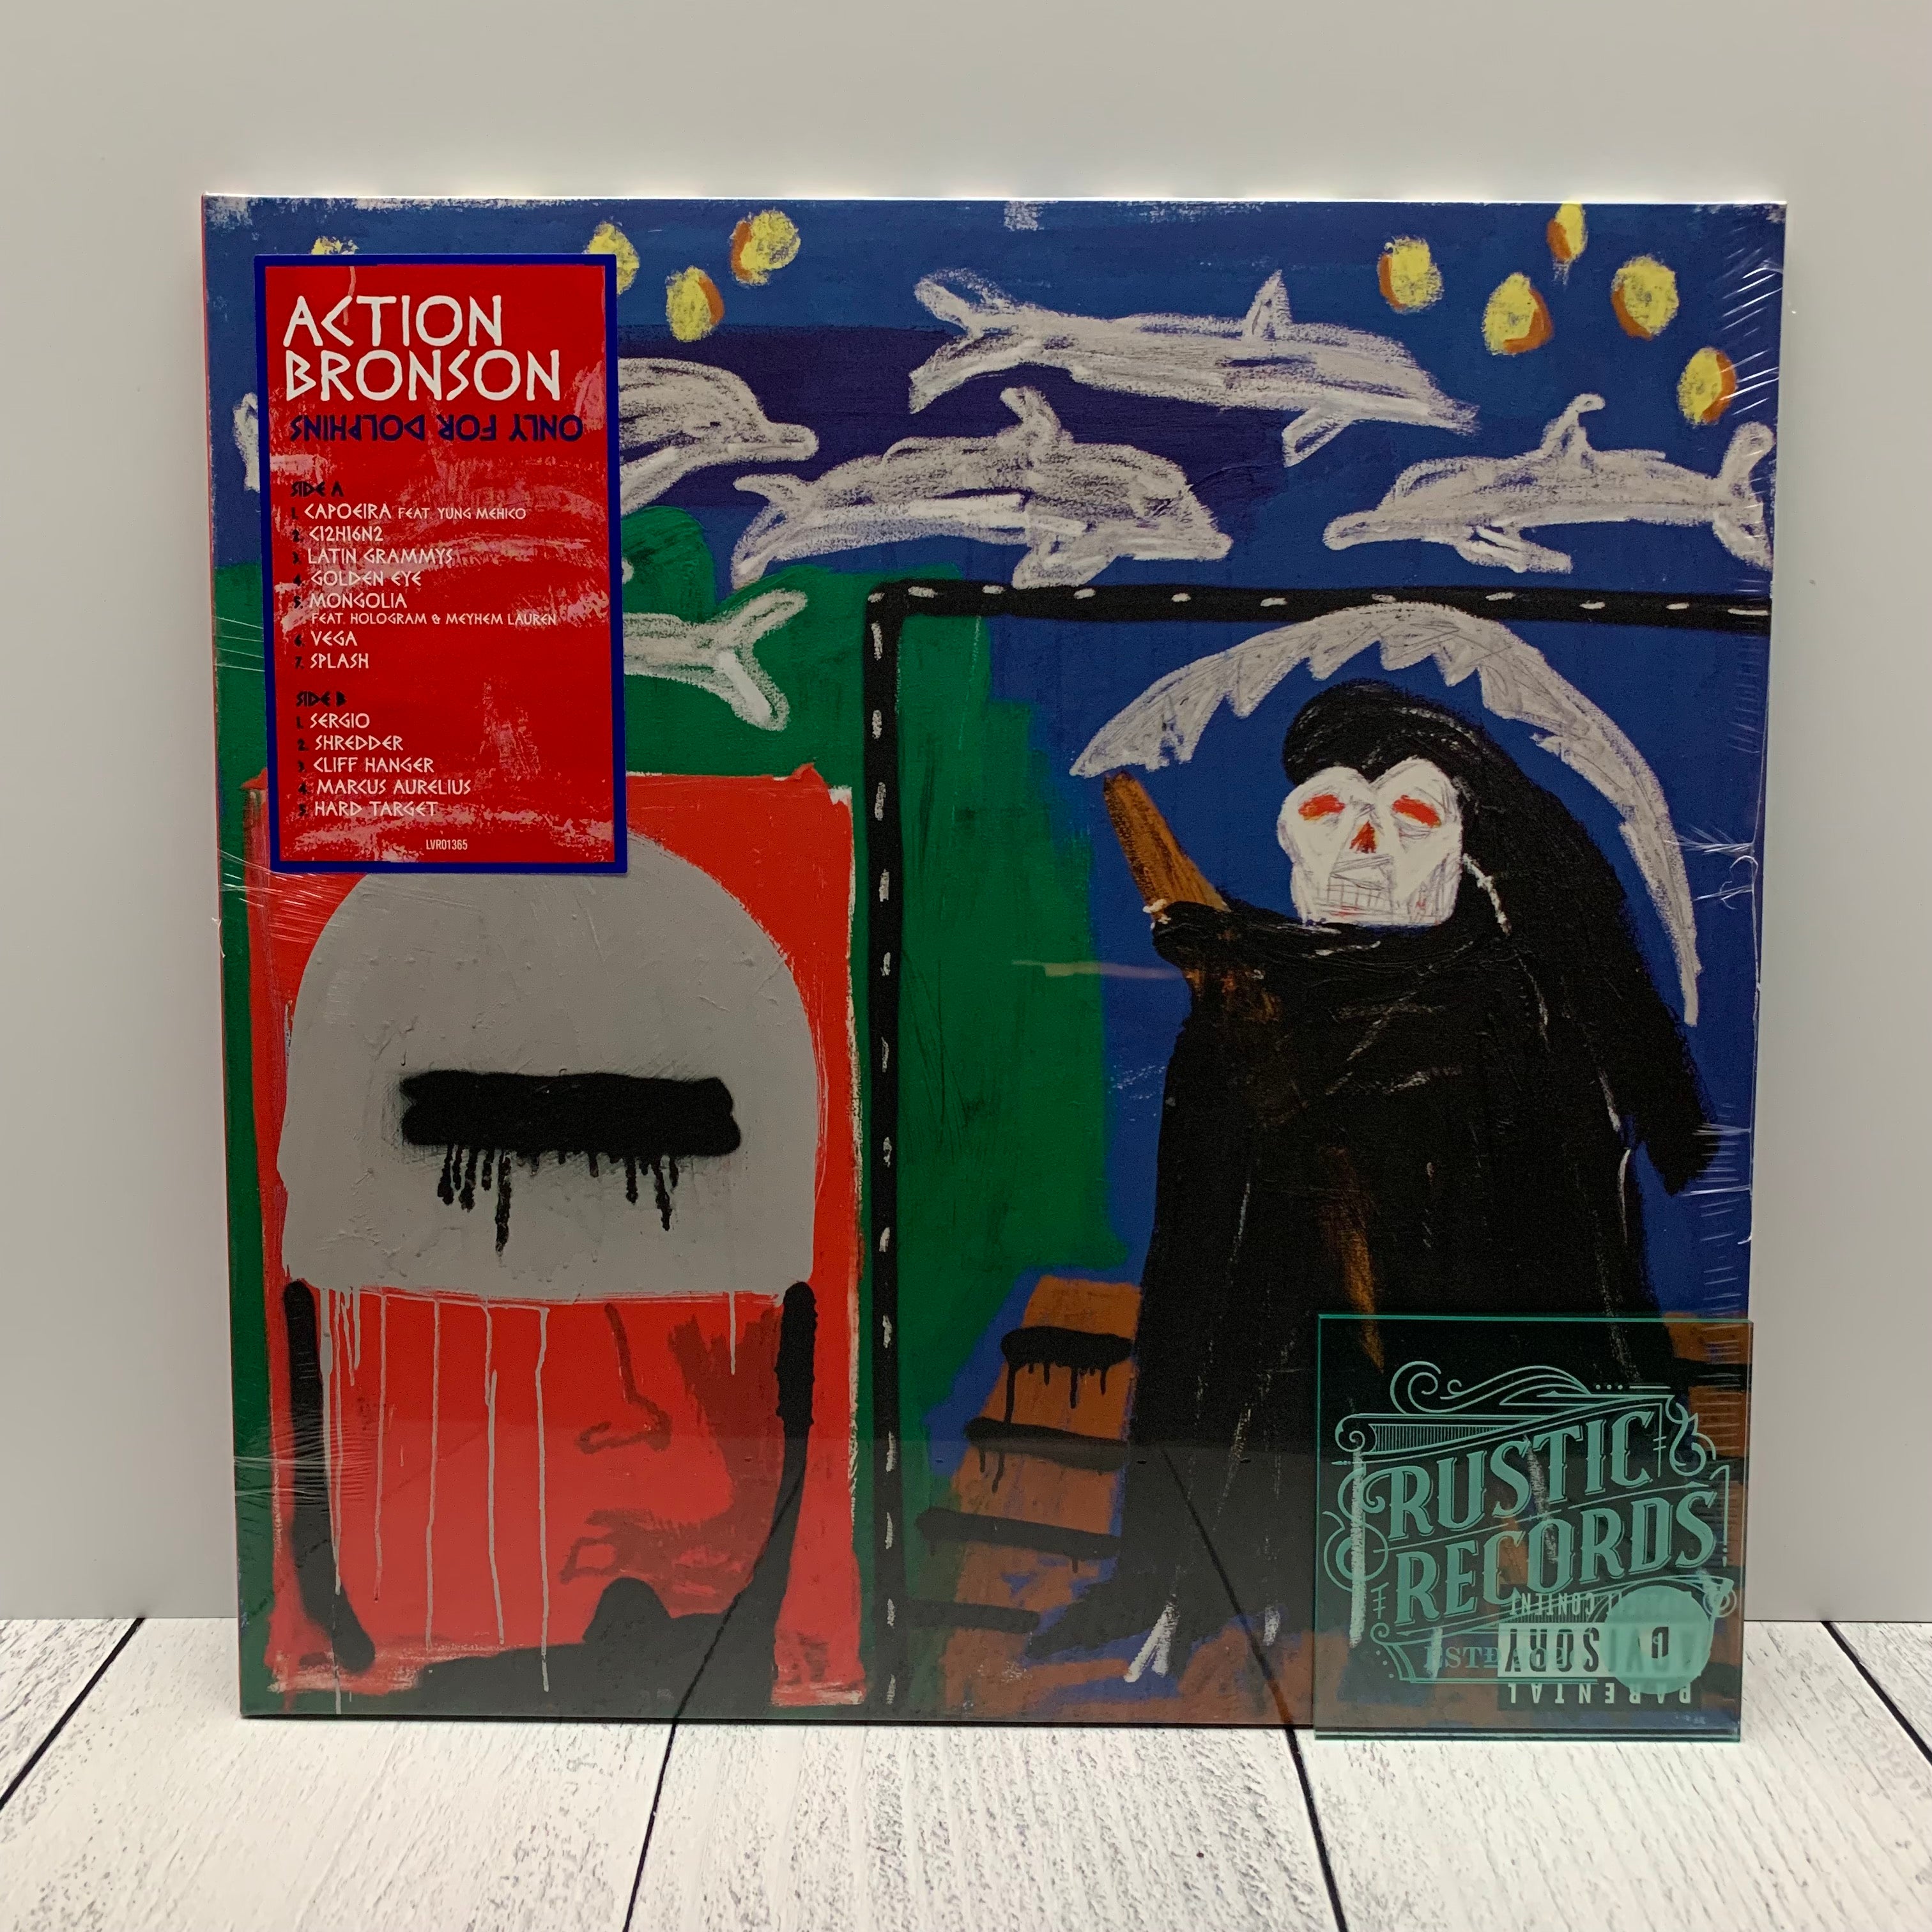 Action Bronson Only For Dolphins レコード